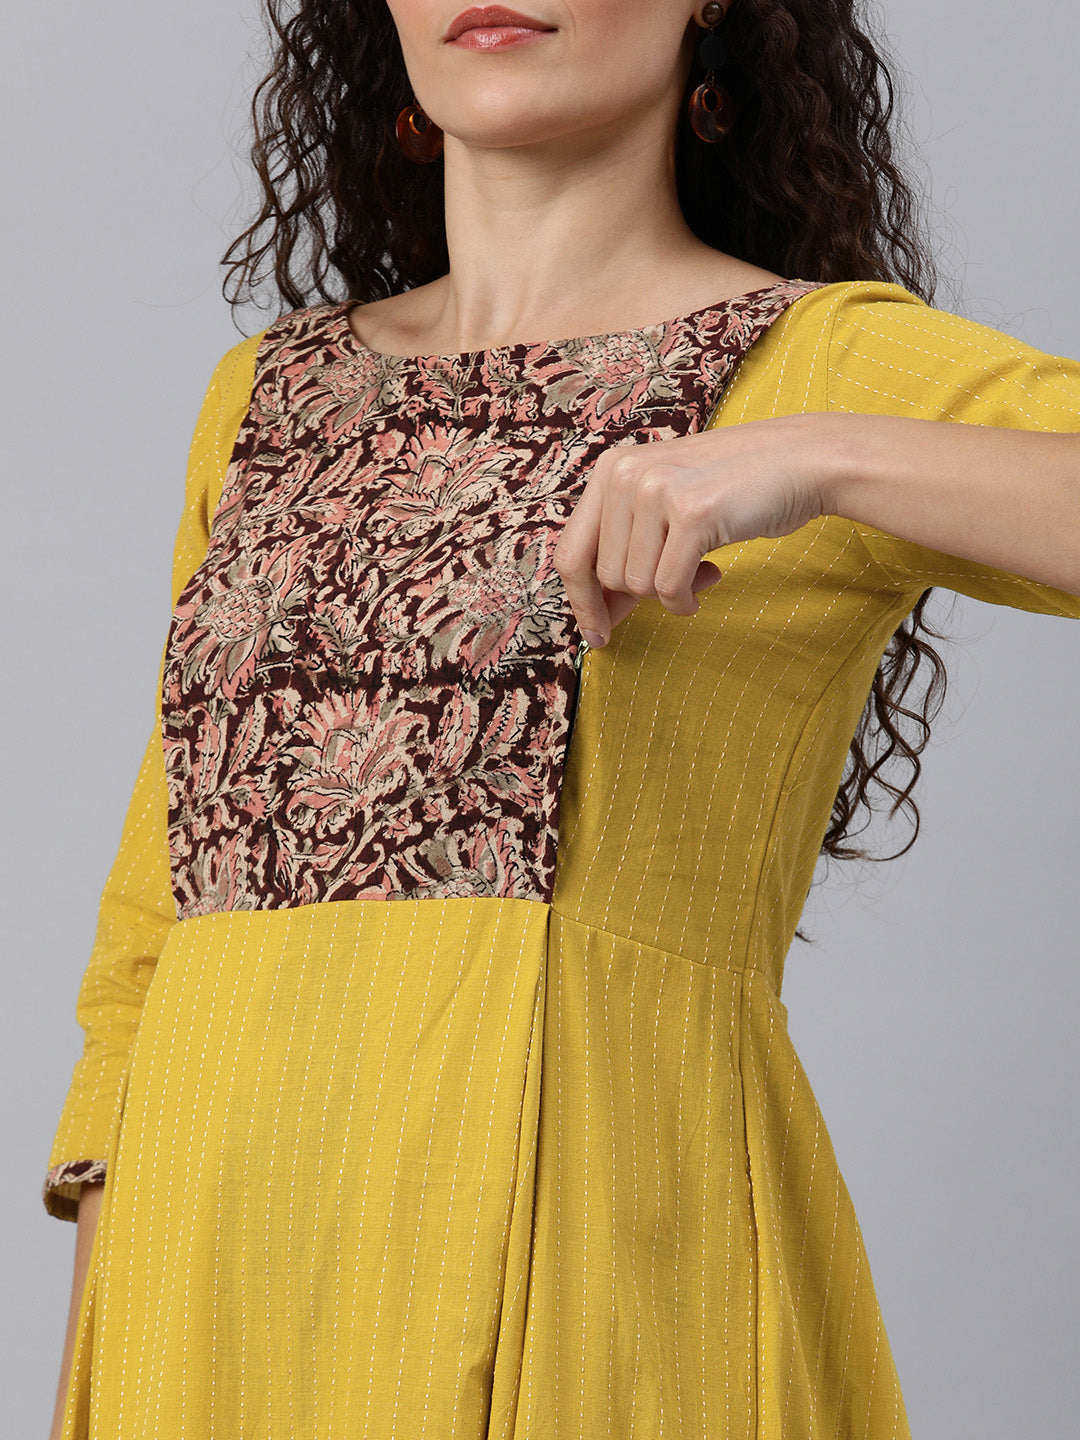 Yellow with Maroon Floral Yoke Printed Cotton Maternity Maxi Dress